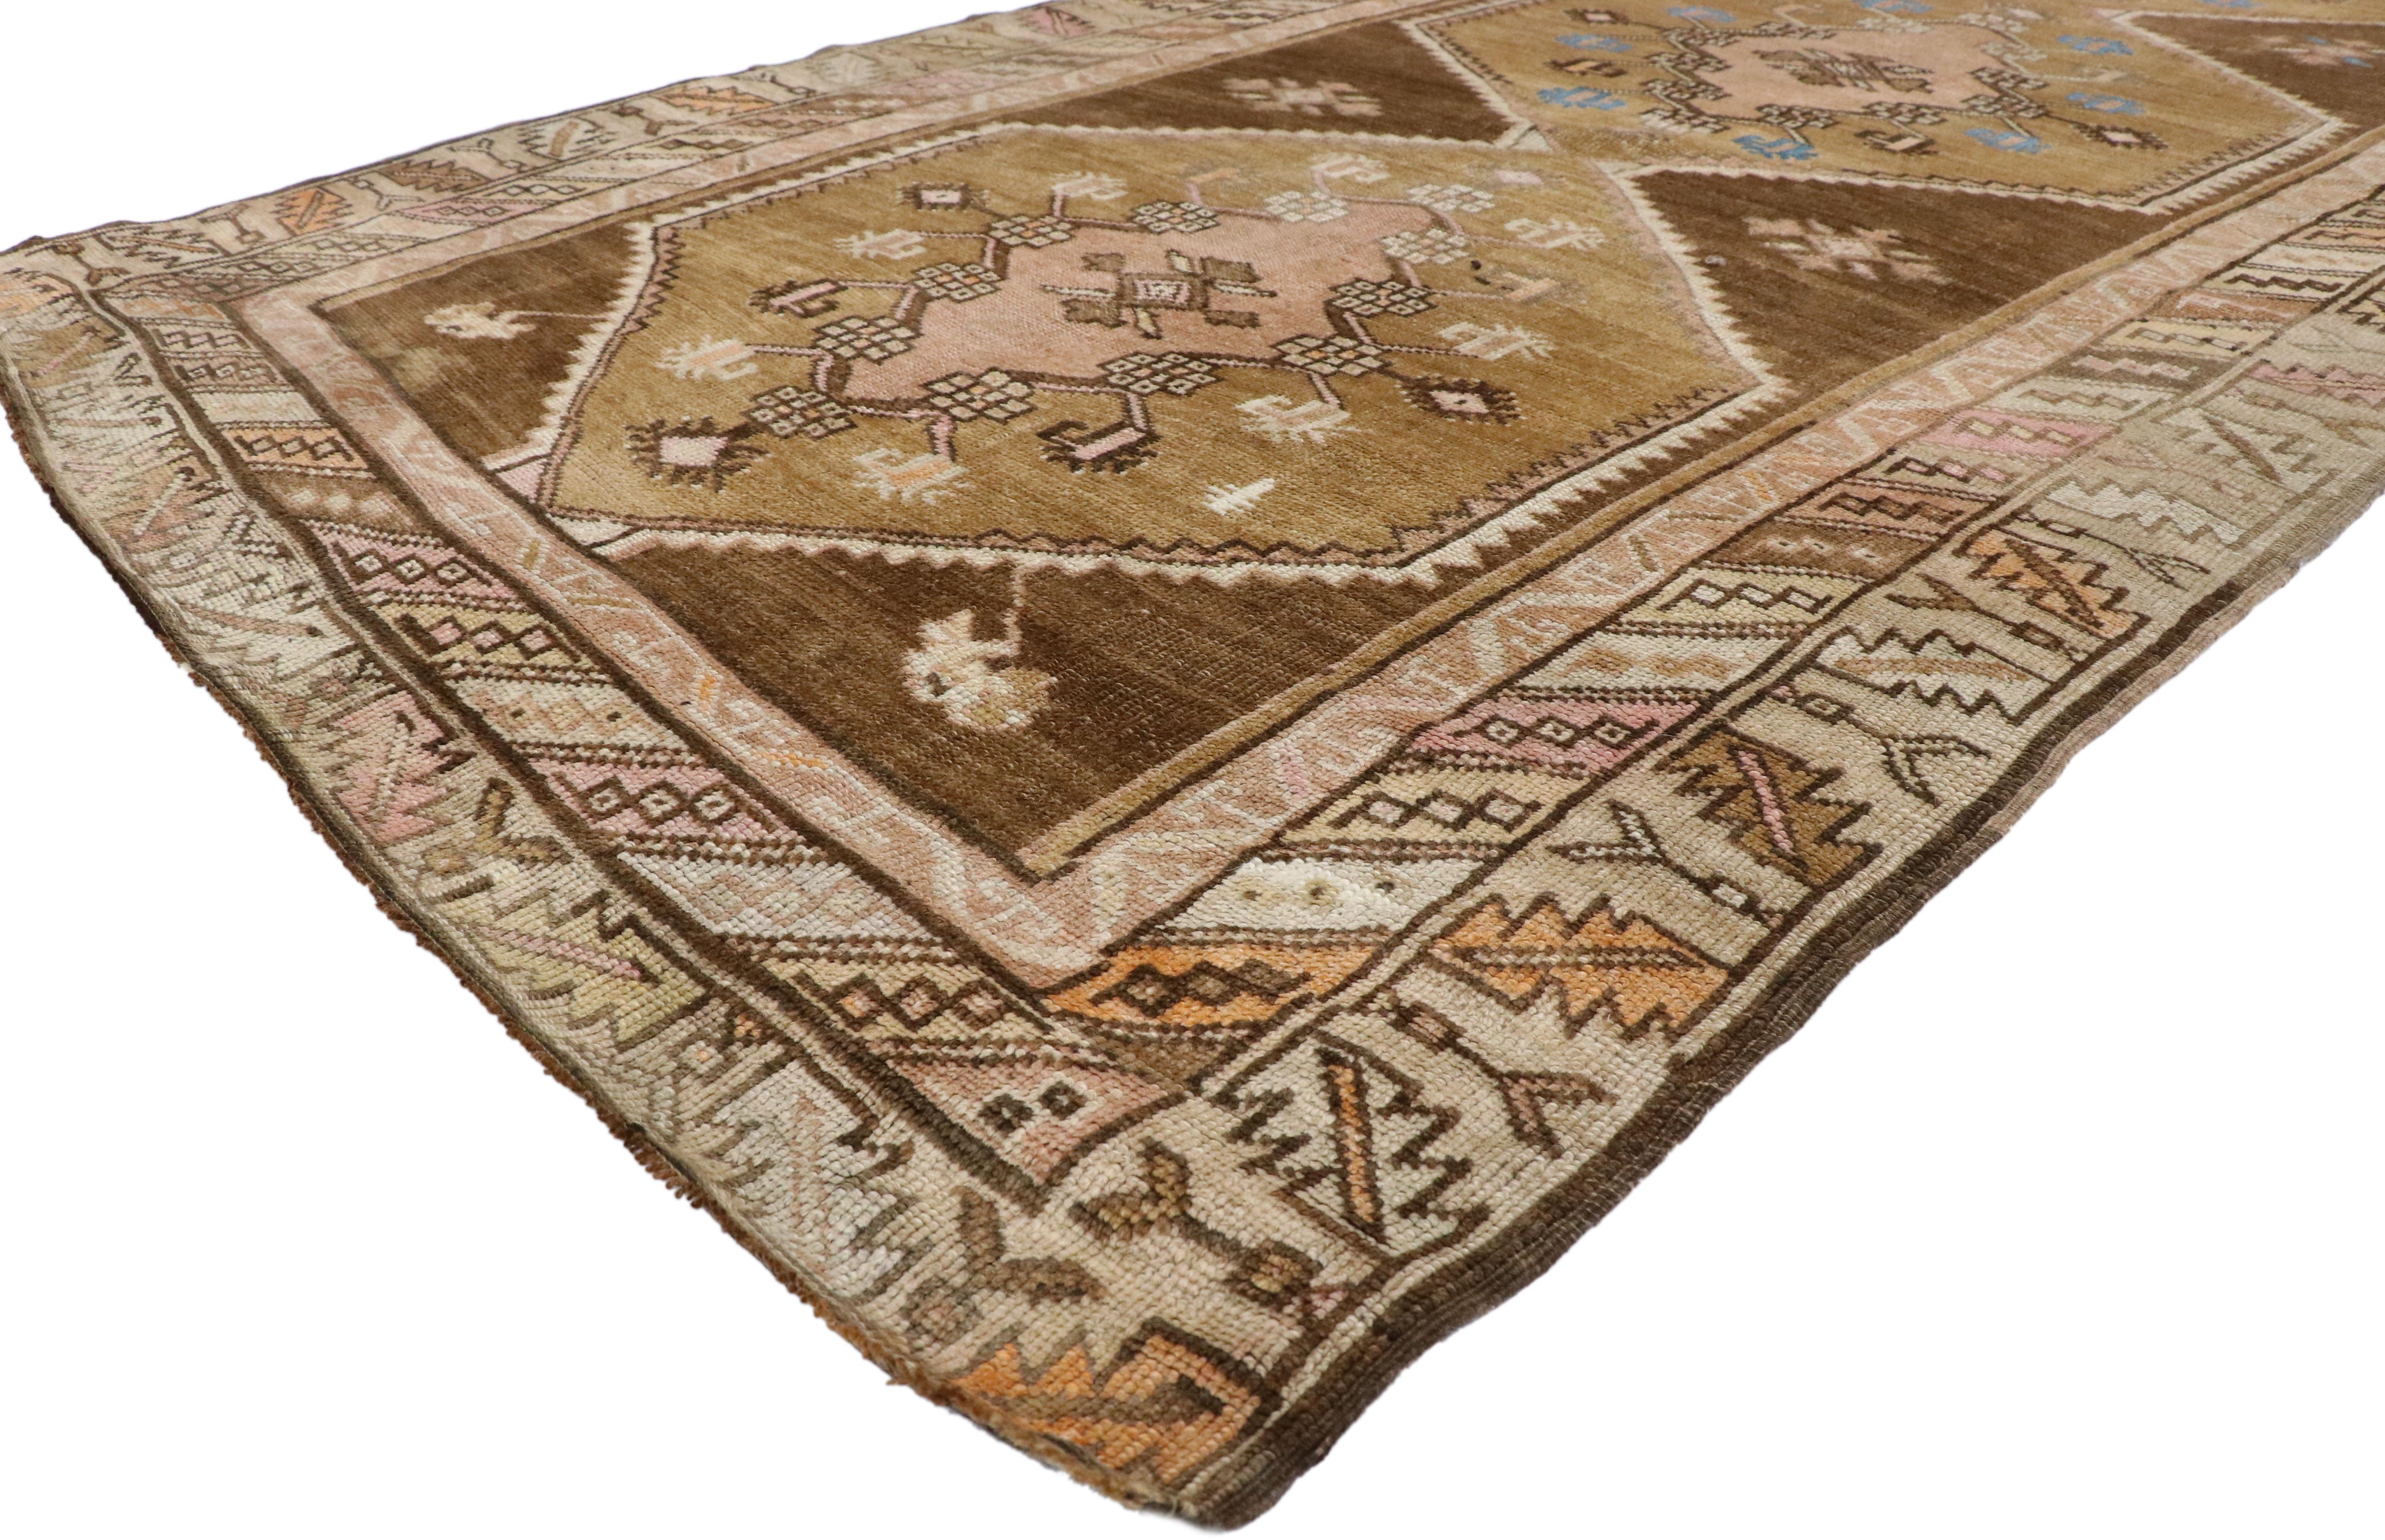 52179 Vintage Turkish Oushak Runner with Romantic Prairie Style, Kars Gallery Rug 04'04 x 11'07.  Warm earth-tones with pastel hues combined with  floral elements of the Prairie School Movement collide in this hand knotted wool vintage Turkish Kars